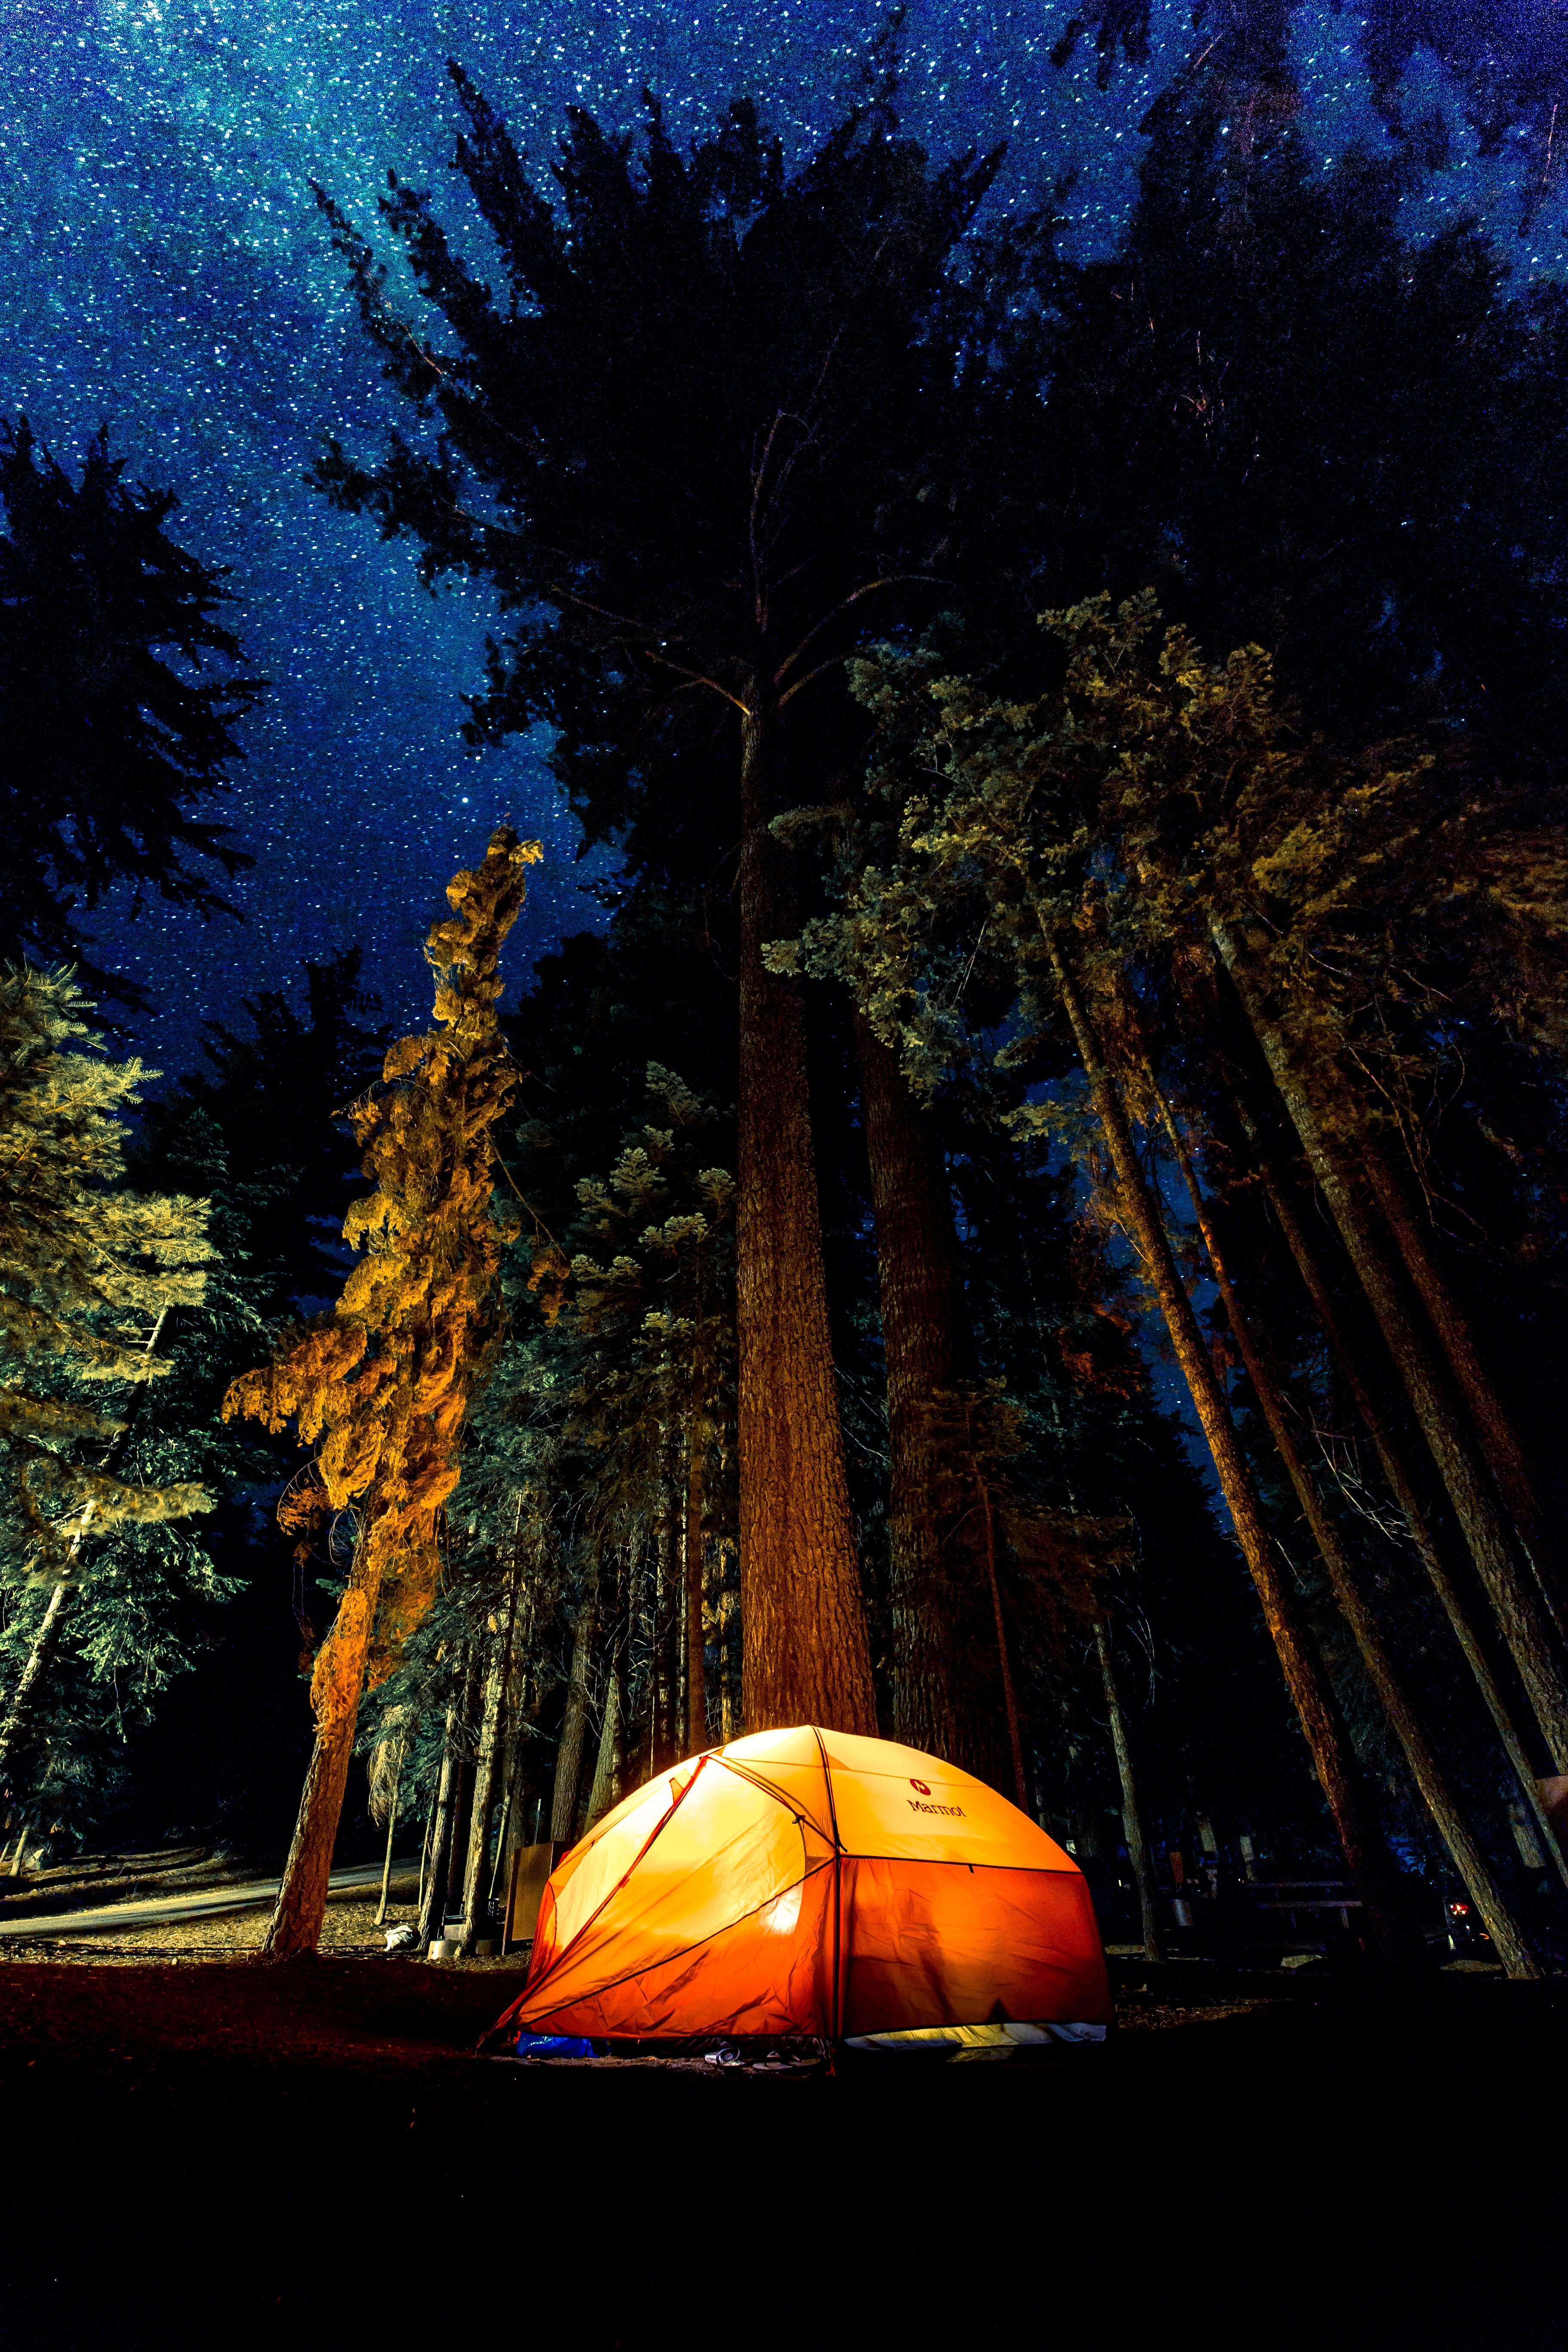 yellow and red campers tent in the middle of forest under starry sky at nighttime